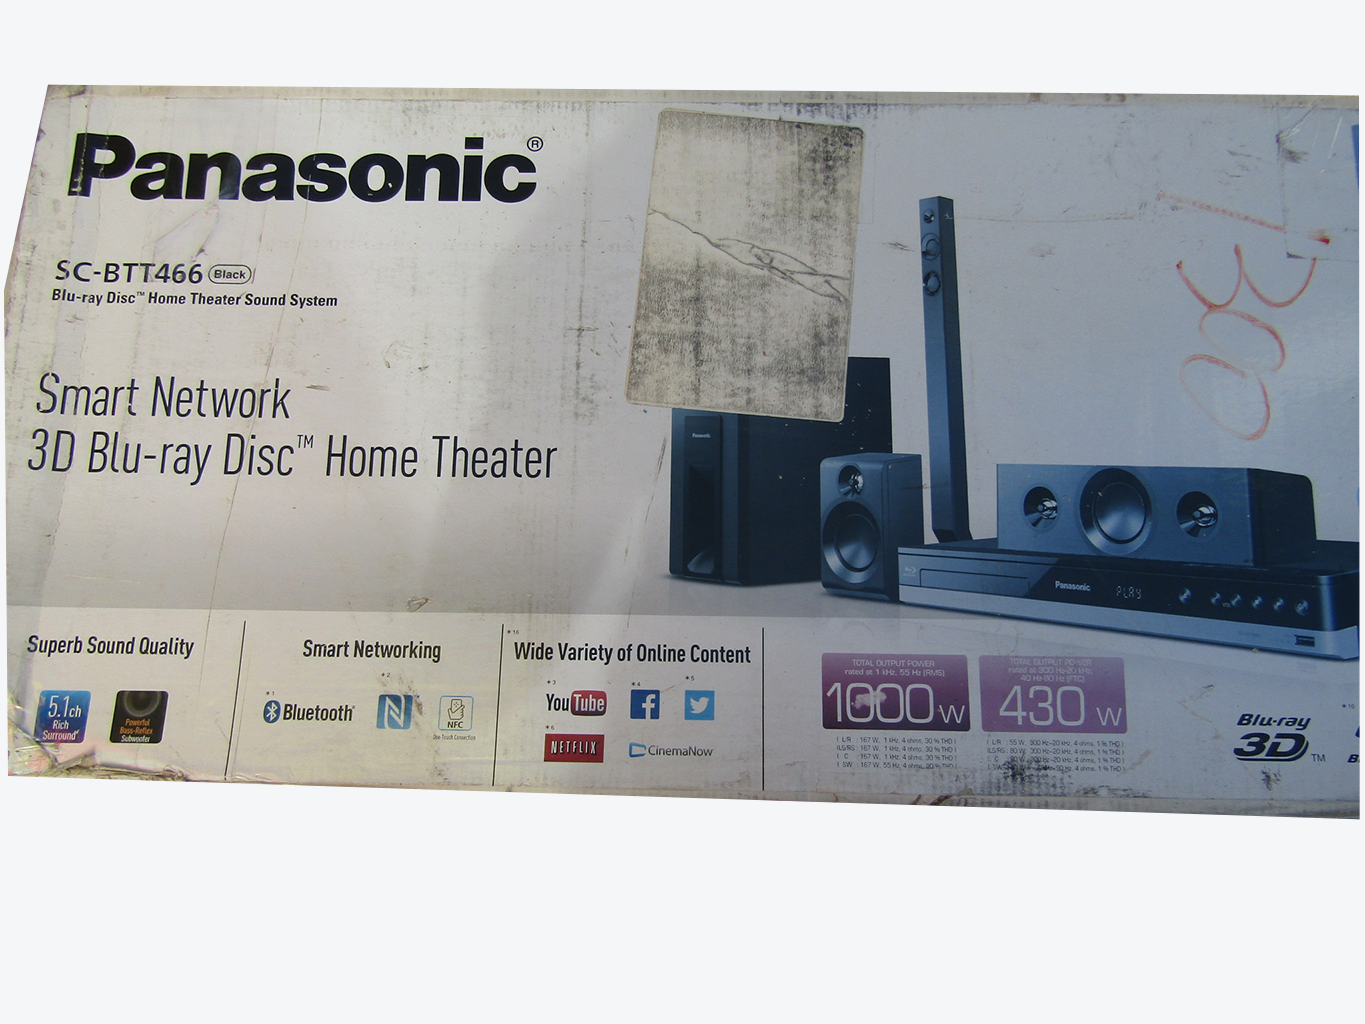 Panasonic Sc-btt466 5.1 Ch Home Theater System with 3d Blu-ray Player VG